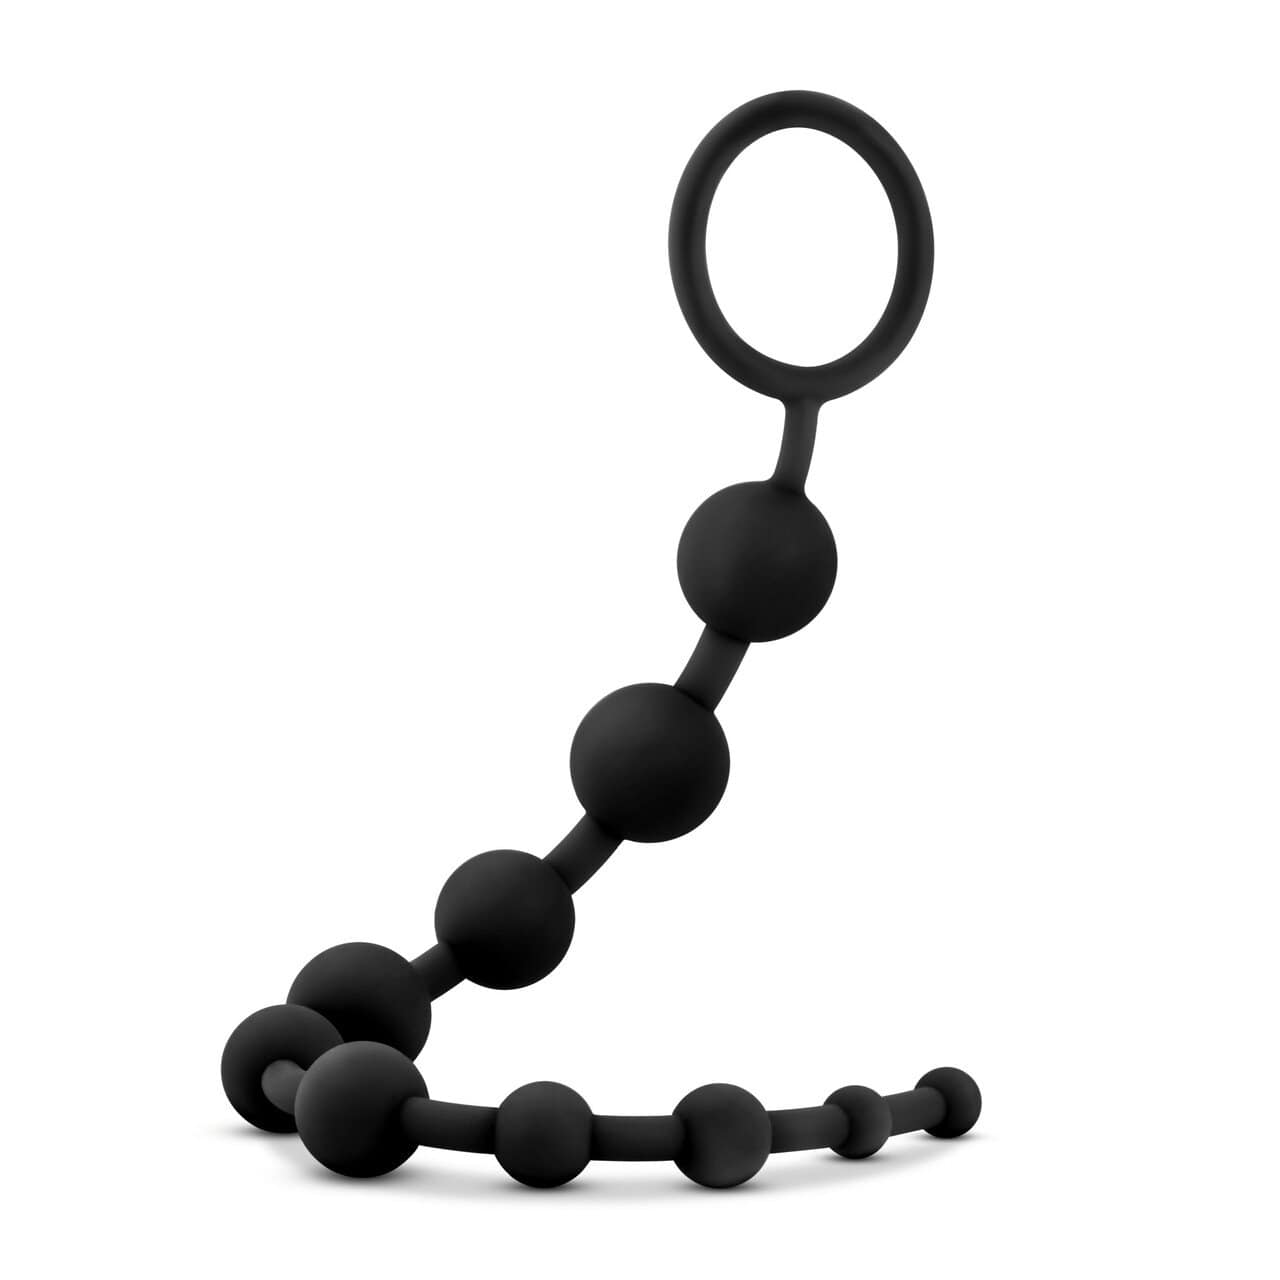 Silicone 10 Anal Beads - Black - Thorn & Feather